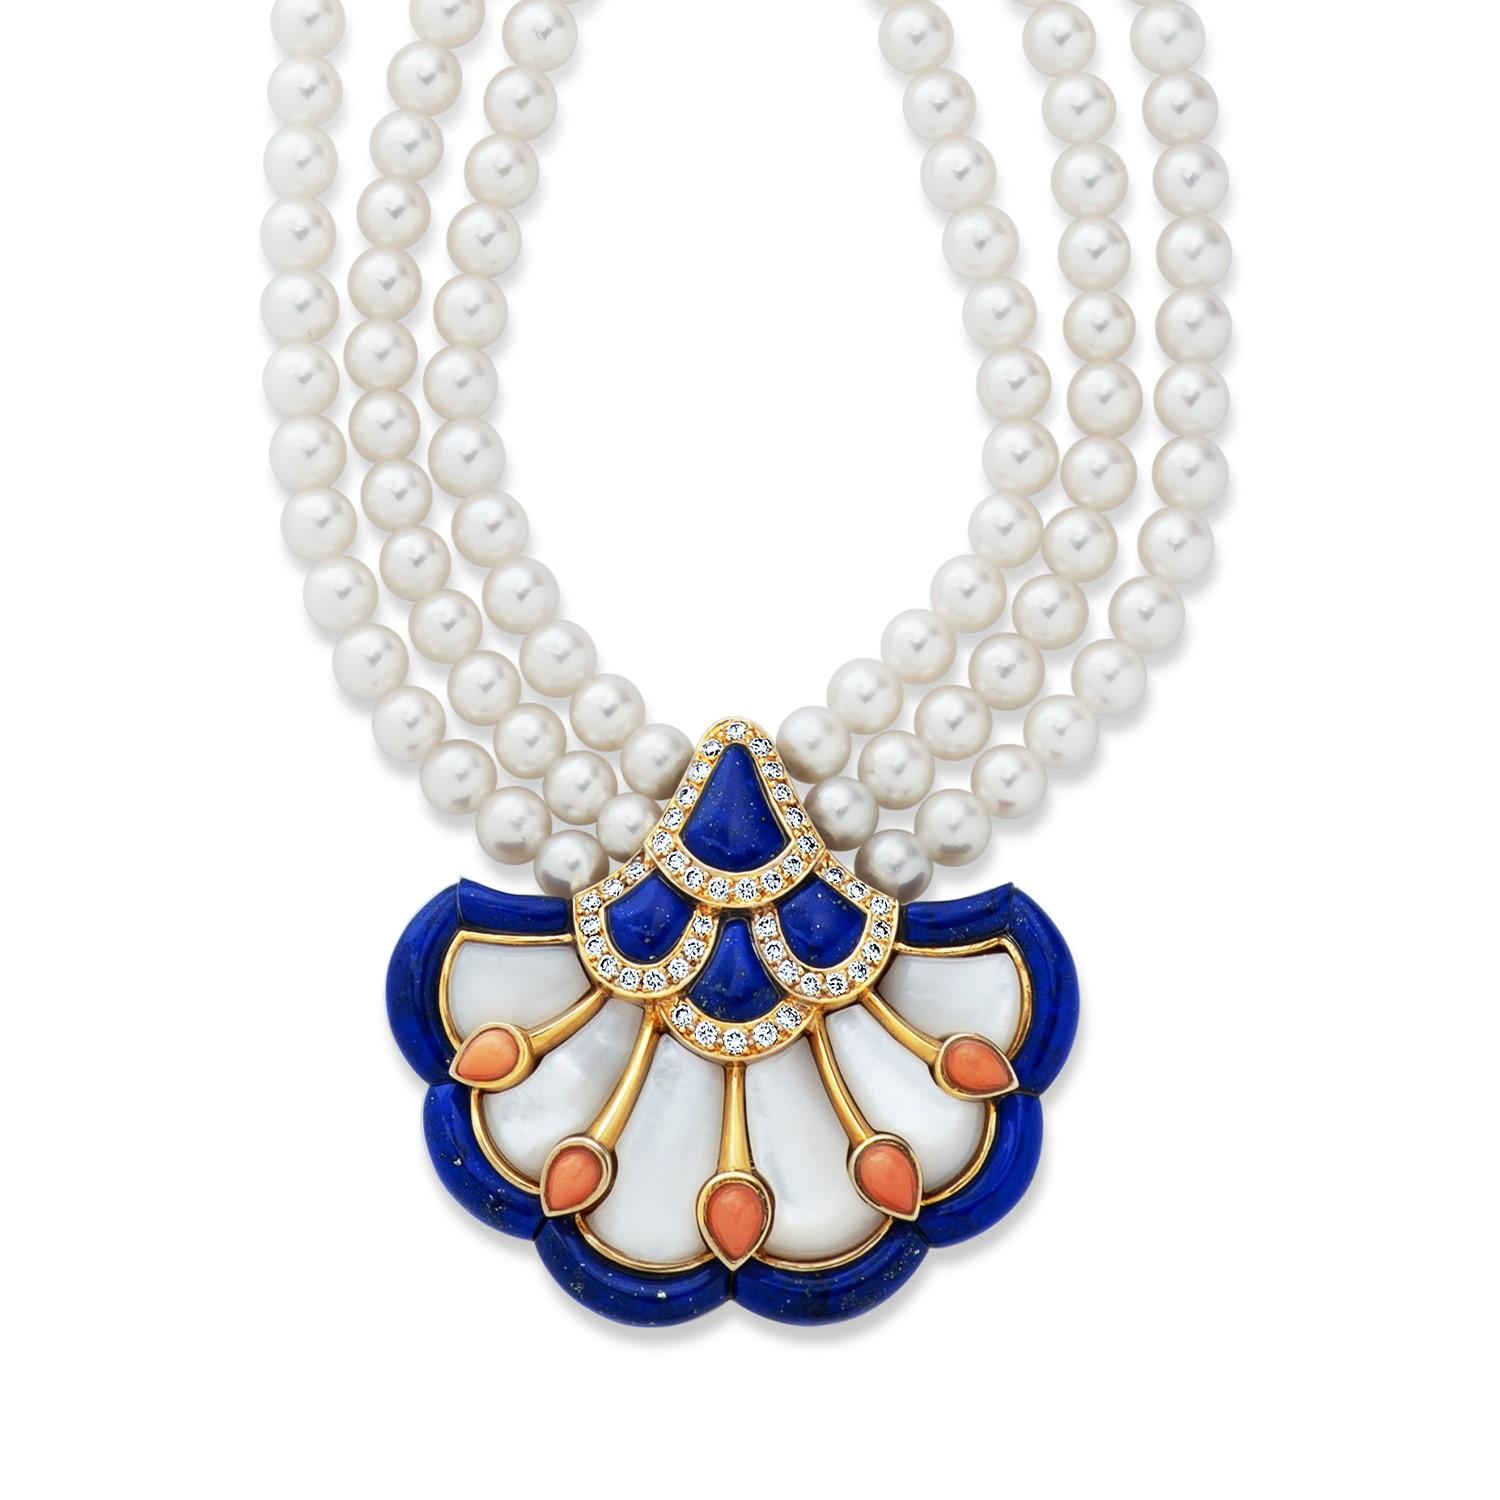 This rare vintage Van Cleef & Arpels 18kt yellow gold pendant/brooch is set with 0.82 carat of round diamonds, as well as coral, mother of pearl and lapis lazuli.  It can be worn hanging from its accompanying multi-strand pearl necklace, or alone as